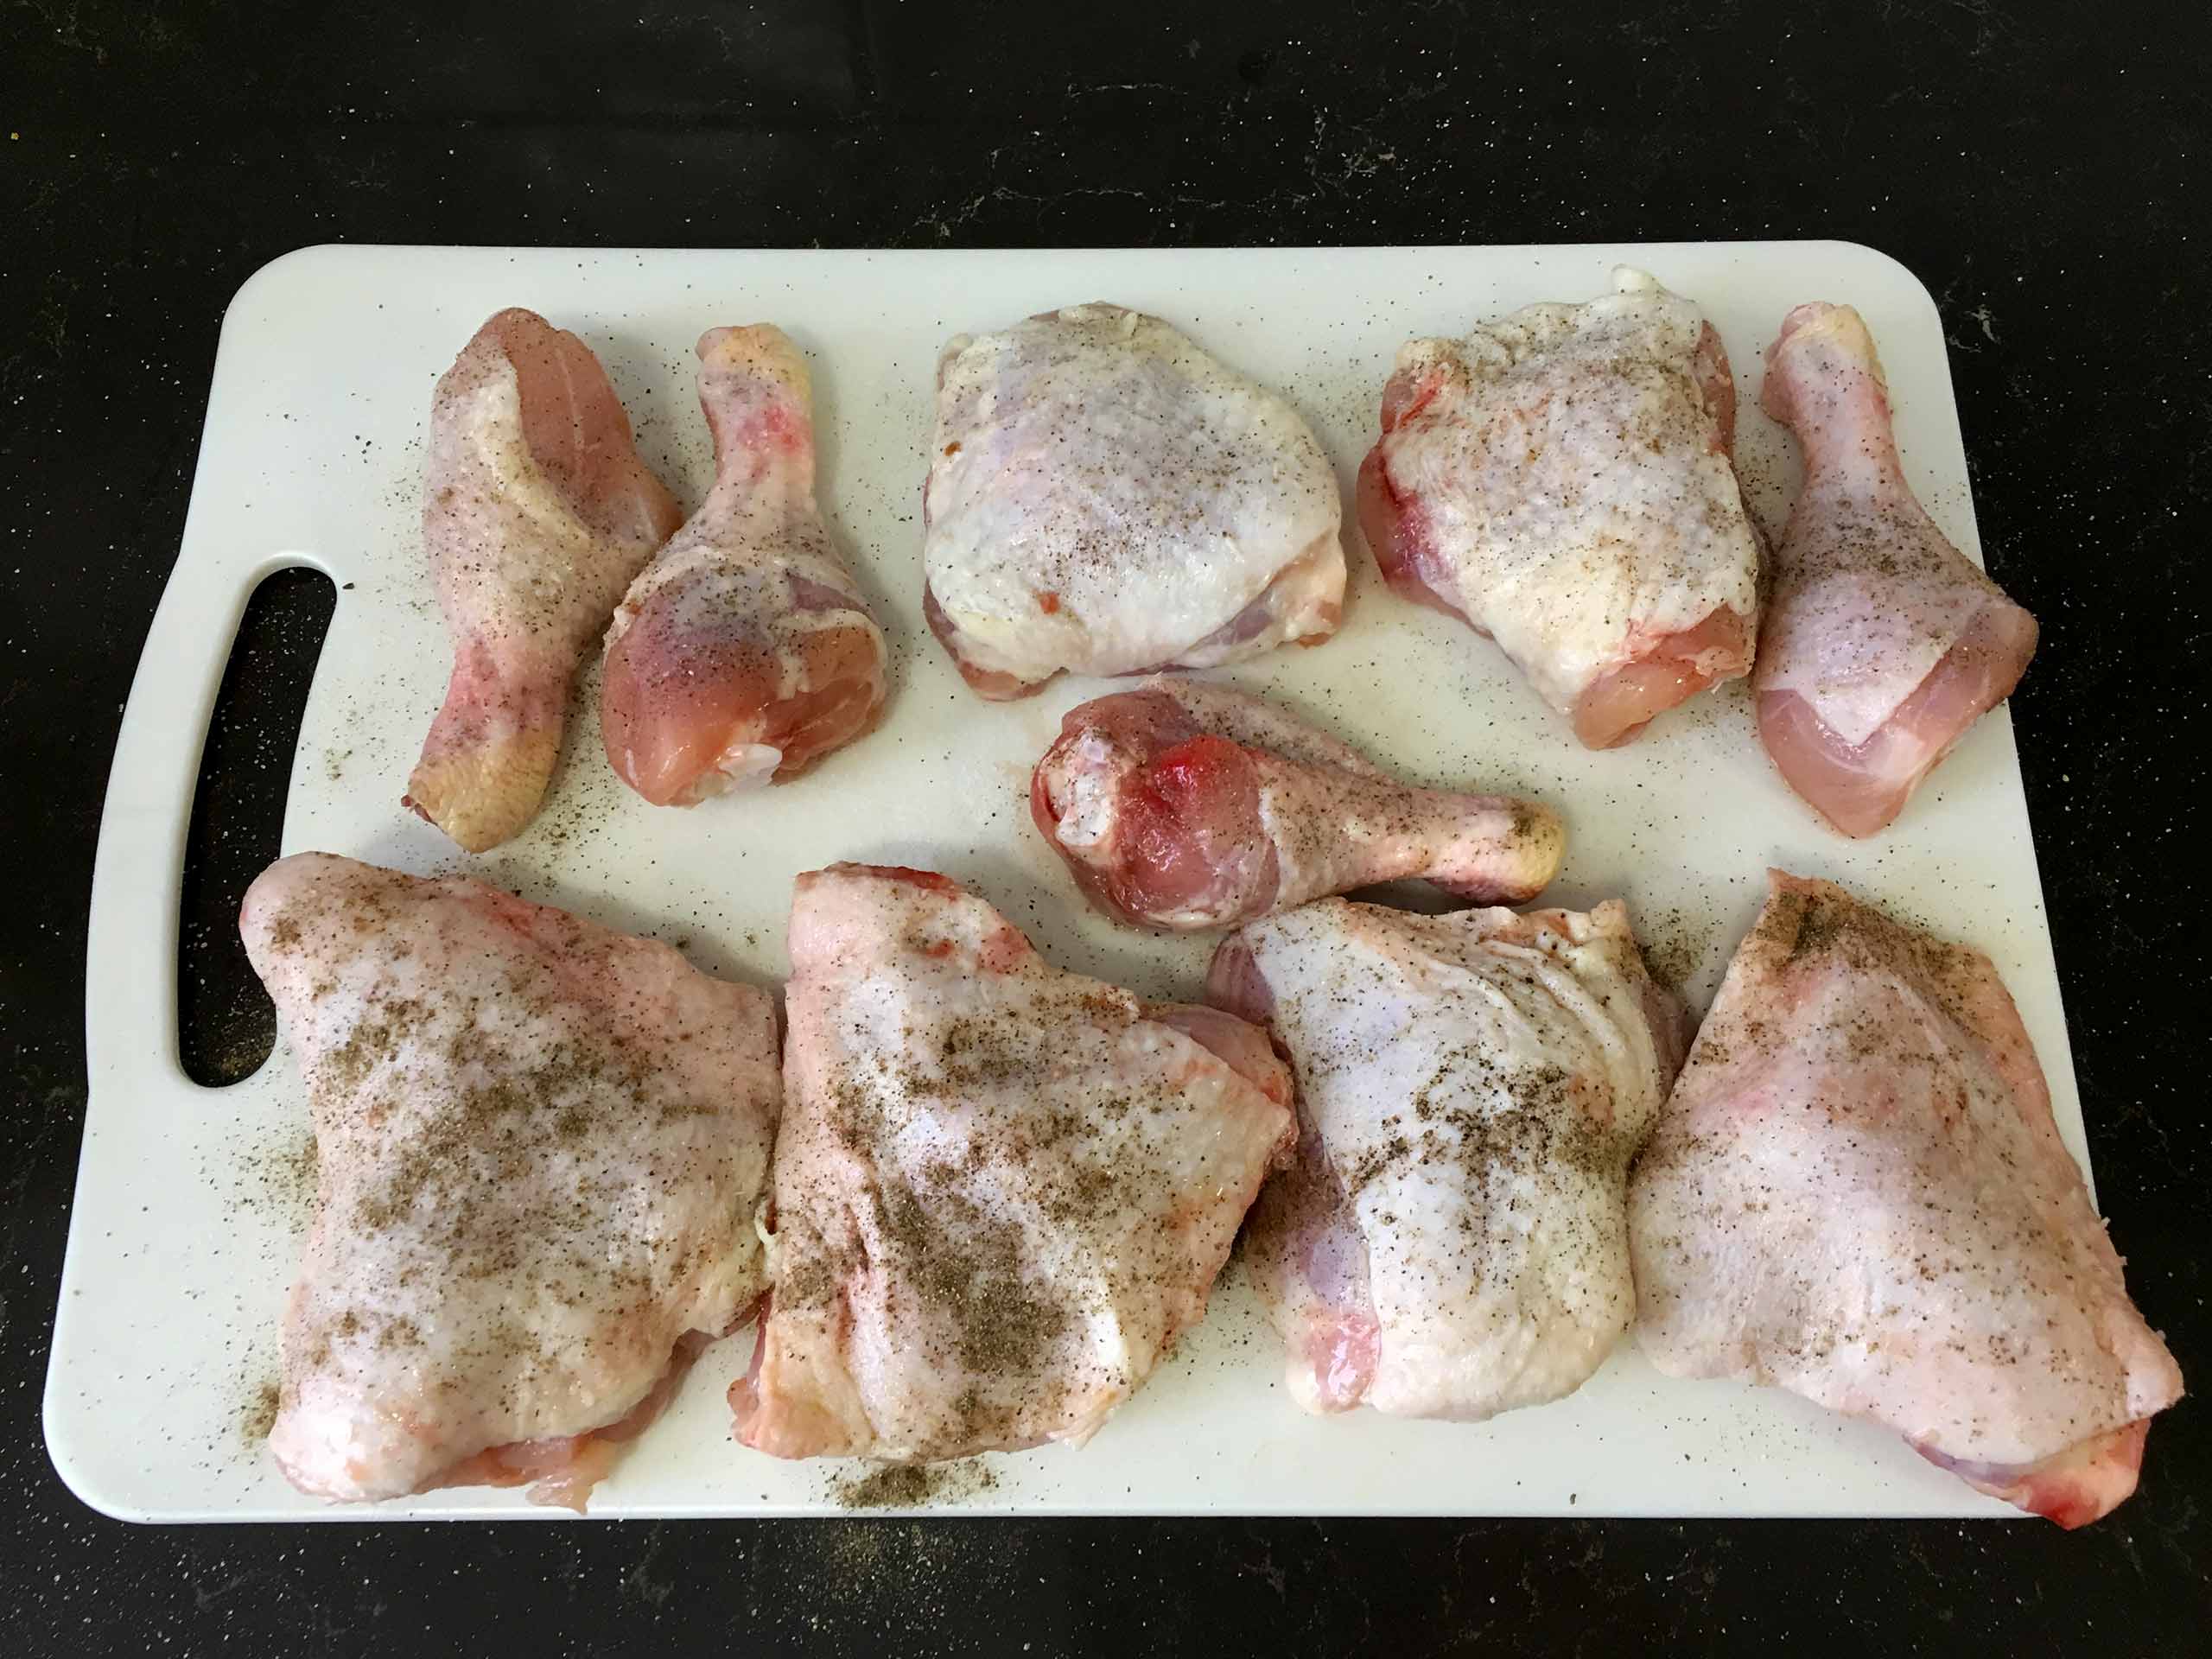 chicken in sweet wine season with pepper and salt